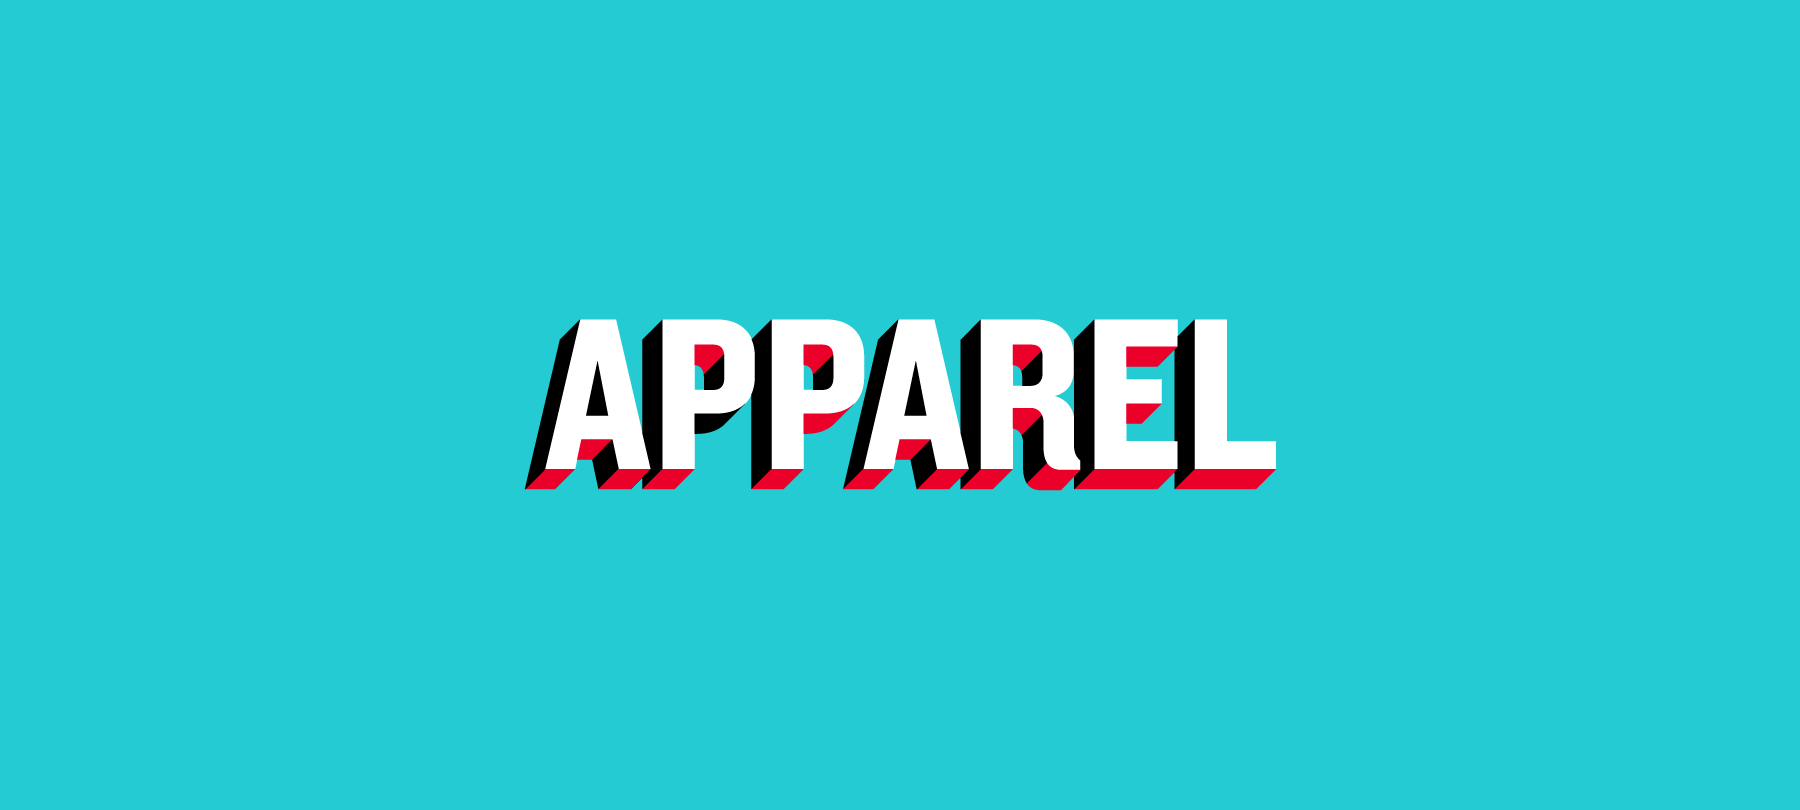 How to Pronounce Apparel 